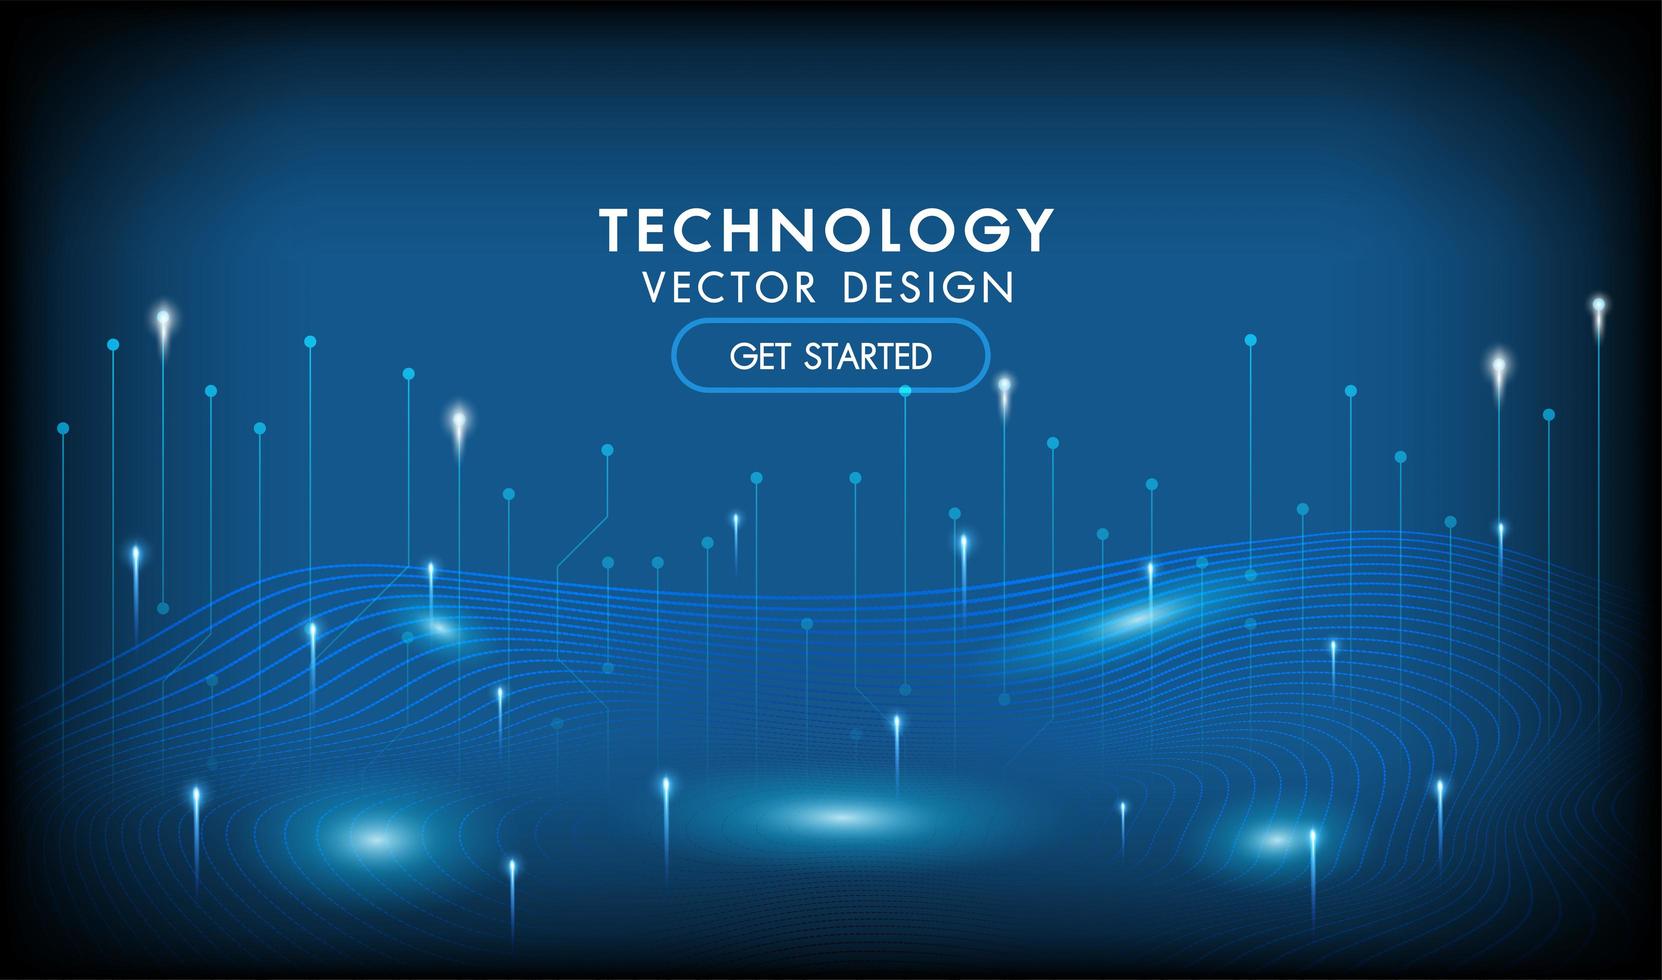 Abstract hi-tech technology background  vector